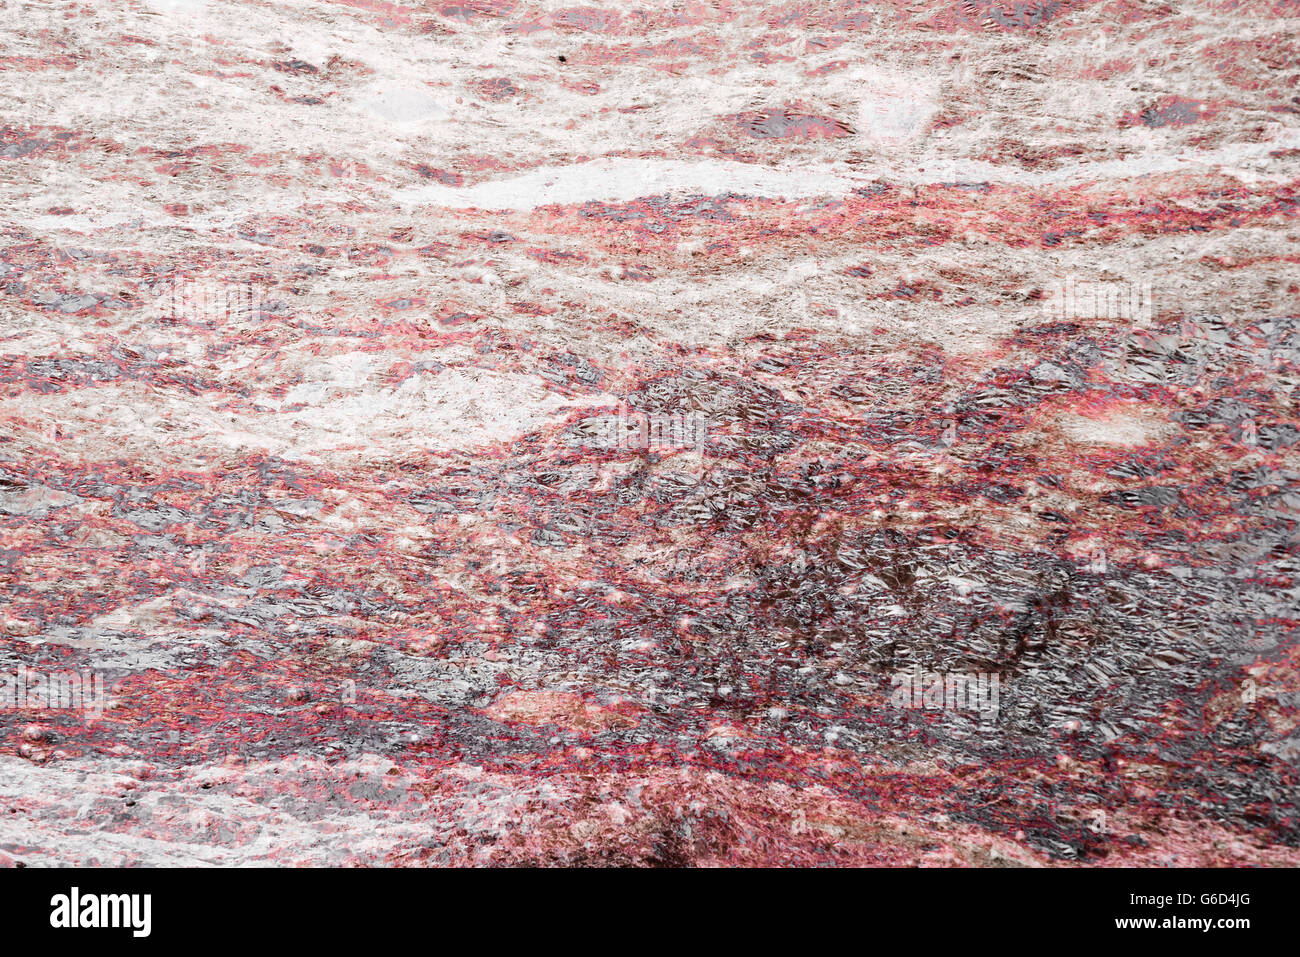 Abstract grunge texture background, vintage style stone surface backdrop. Stock Photo